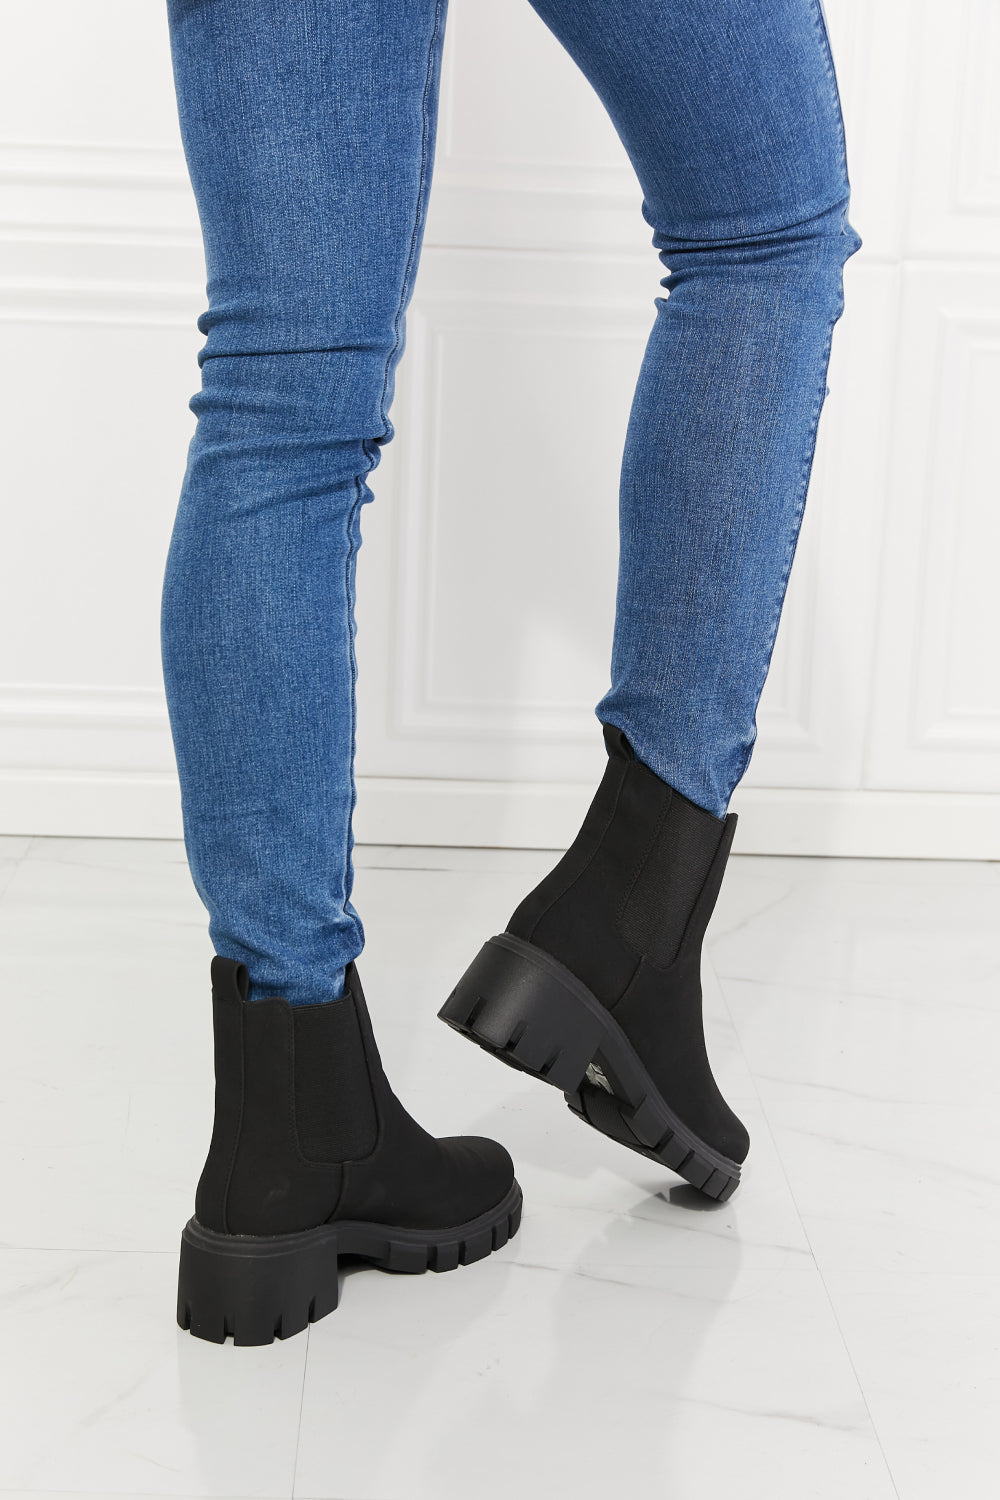 MMShoes Work For It Matte Lug Sole Chelsea Boots in Black - nailedmoms